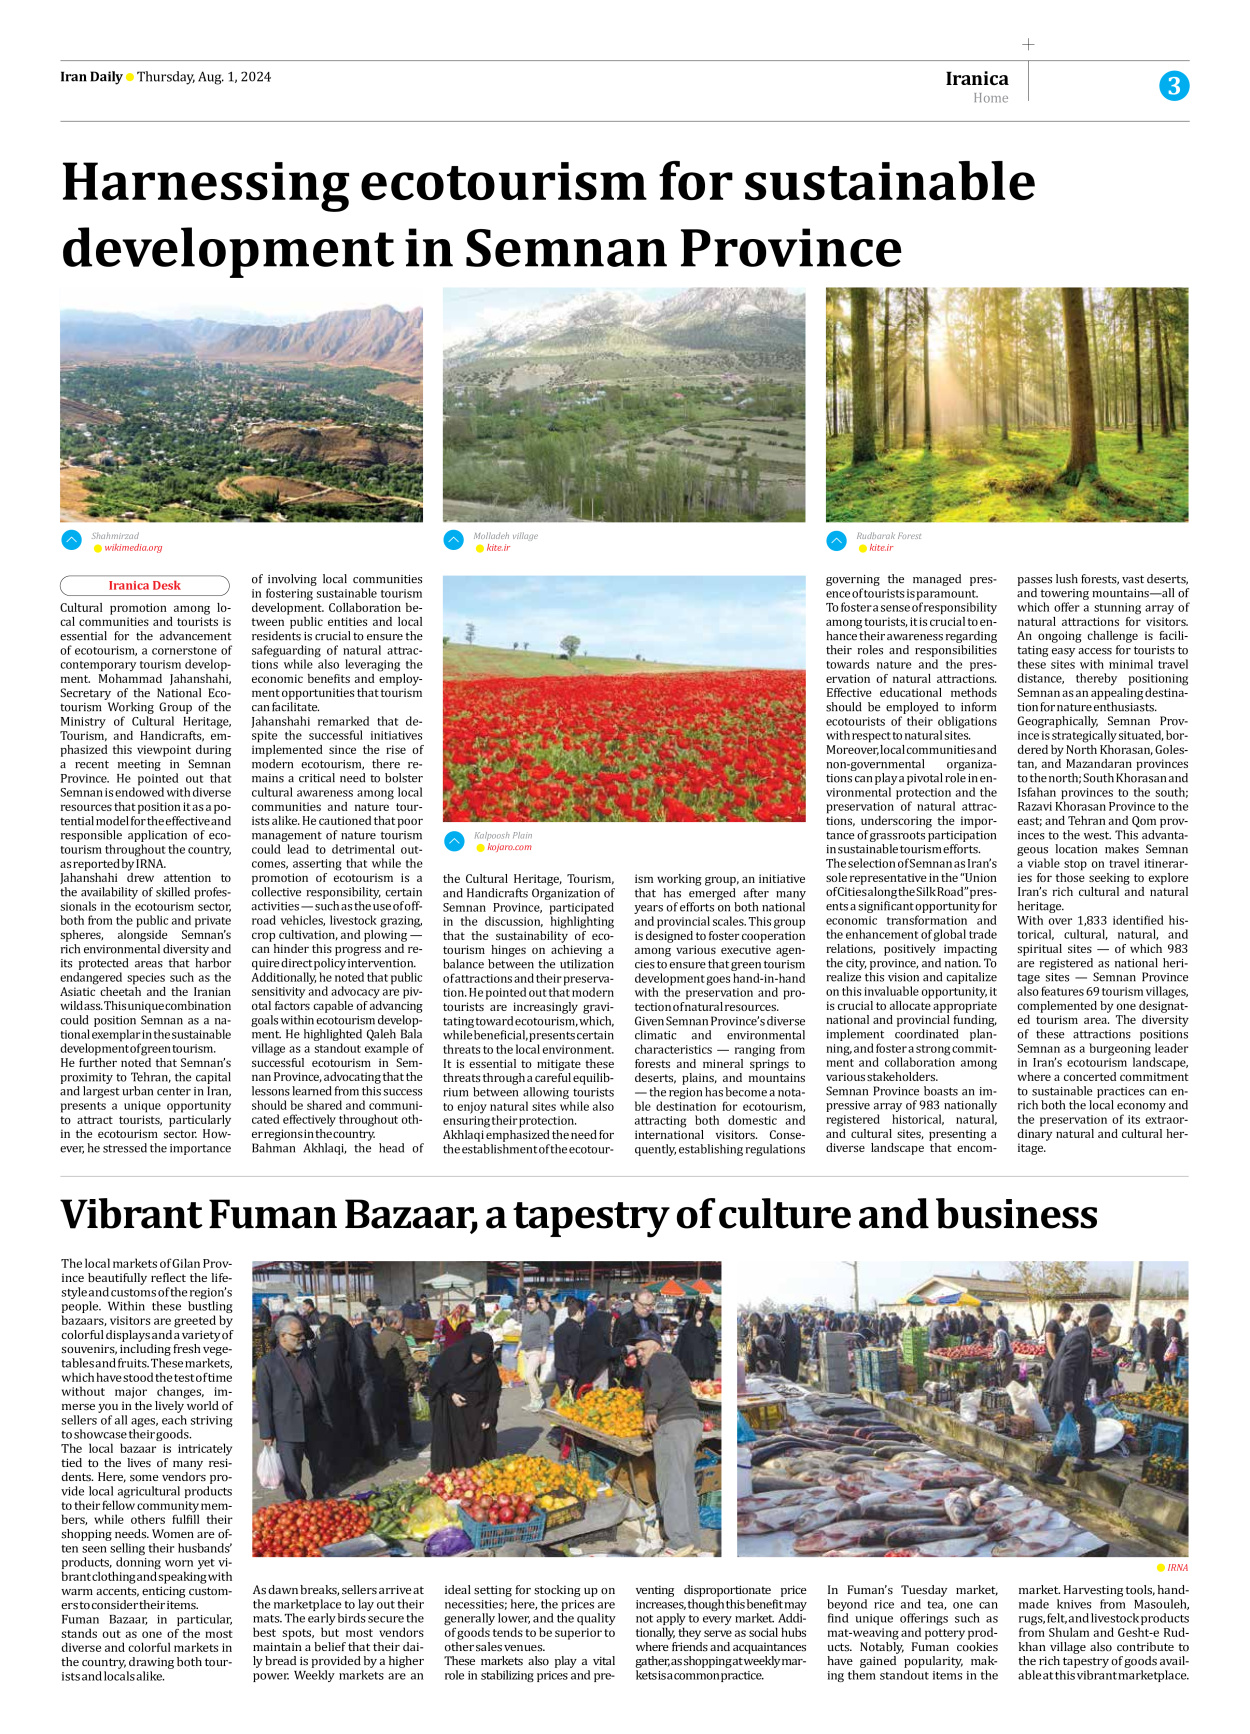 Iran Daily - Number Seven Thousand Six Hundred and Seventeen - 01 August 2024 - Page 3